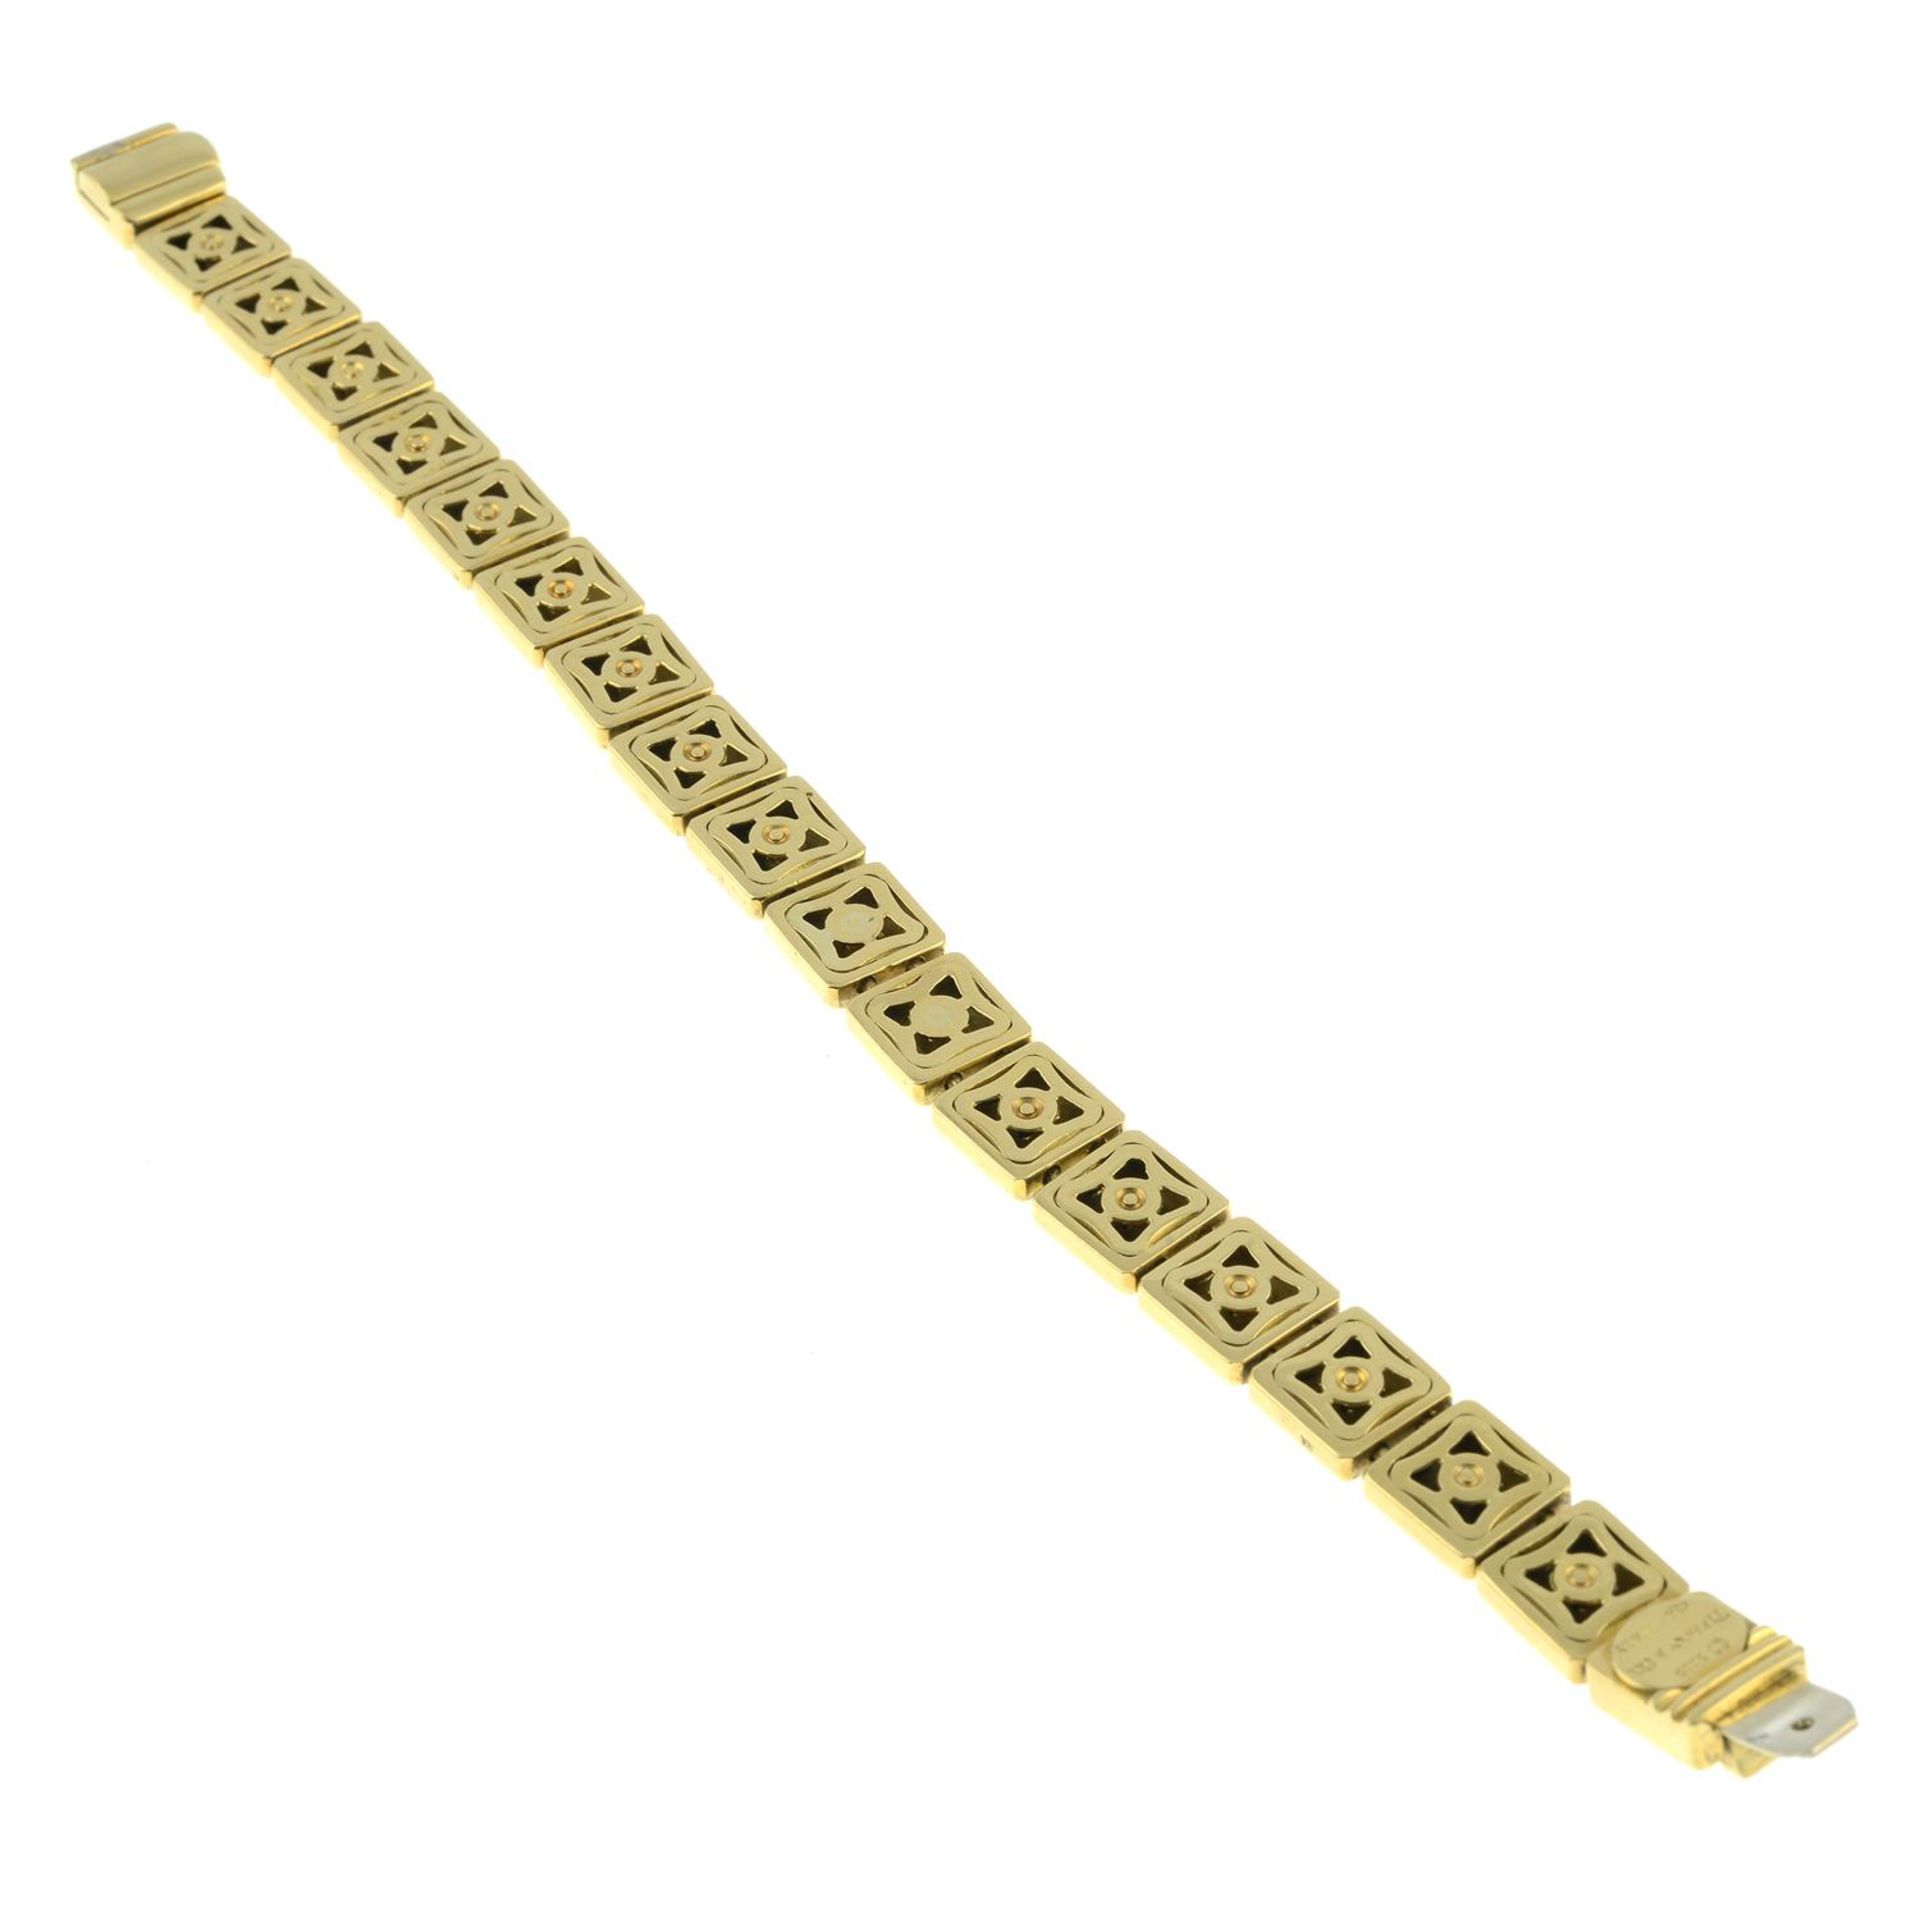 An 18ct gold square tile-link bracelet, by Tiffany and Co. - Image 5 of 5